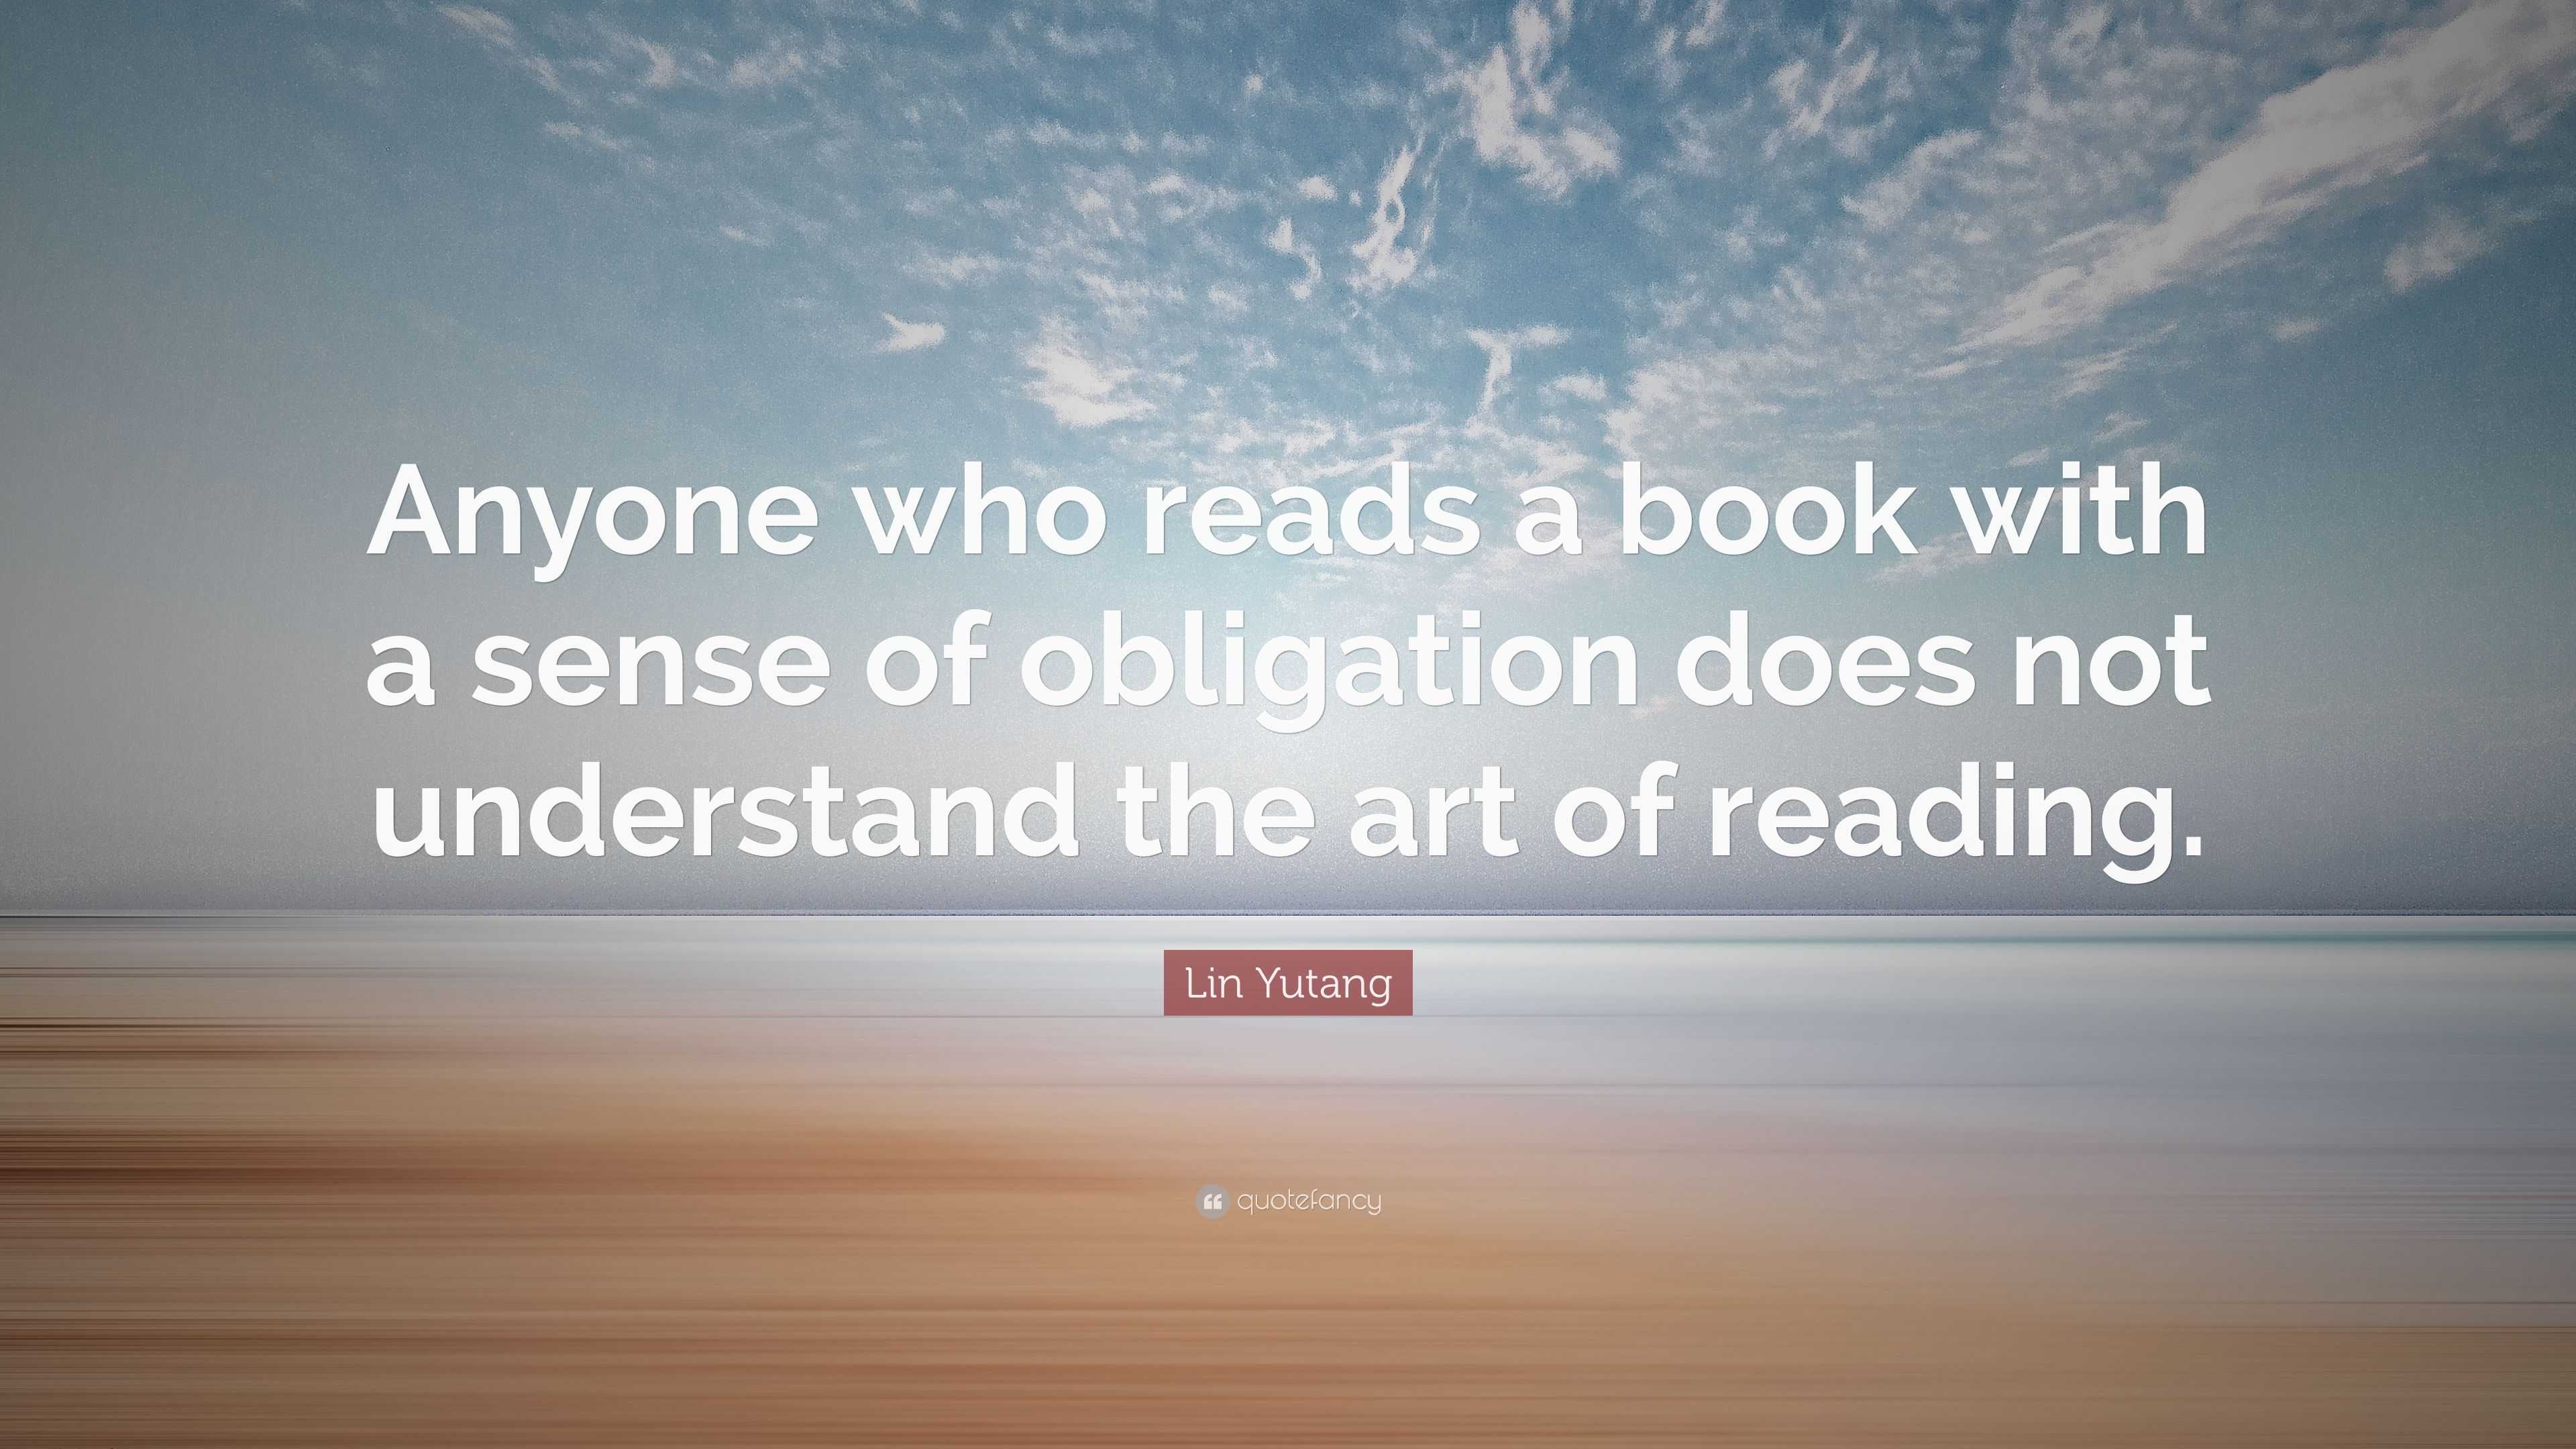 Lin Yutang Quote: “Anyone who reads a book with a sense of obligation ...